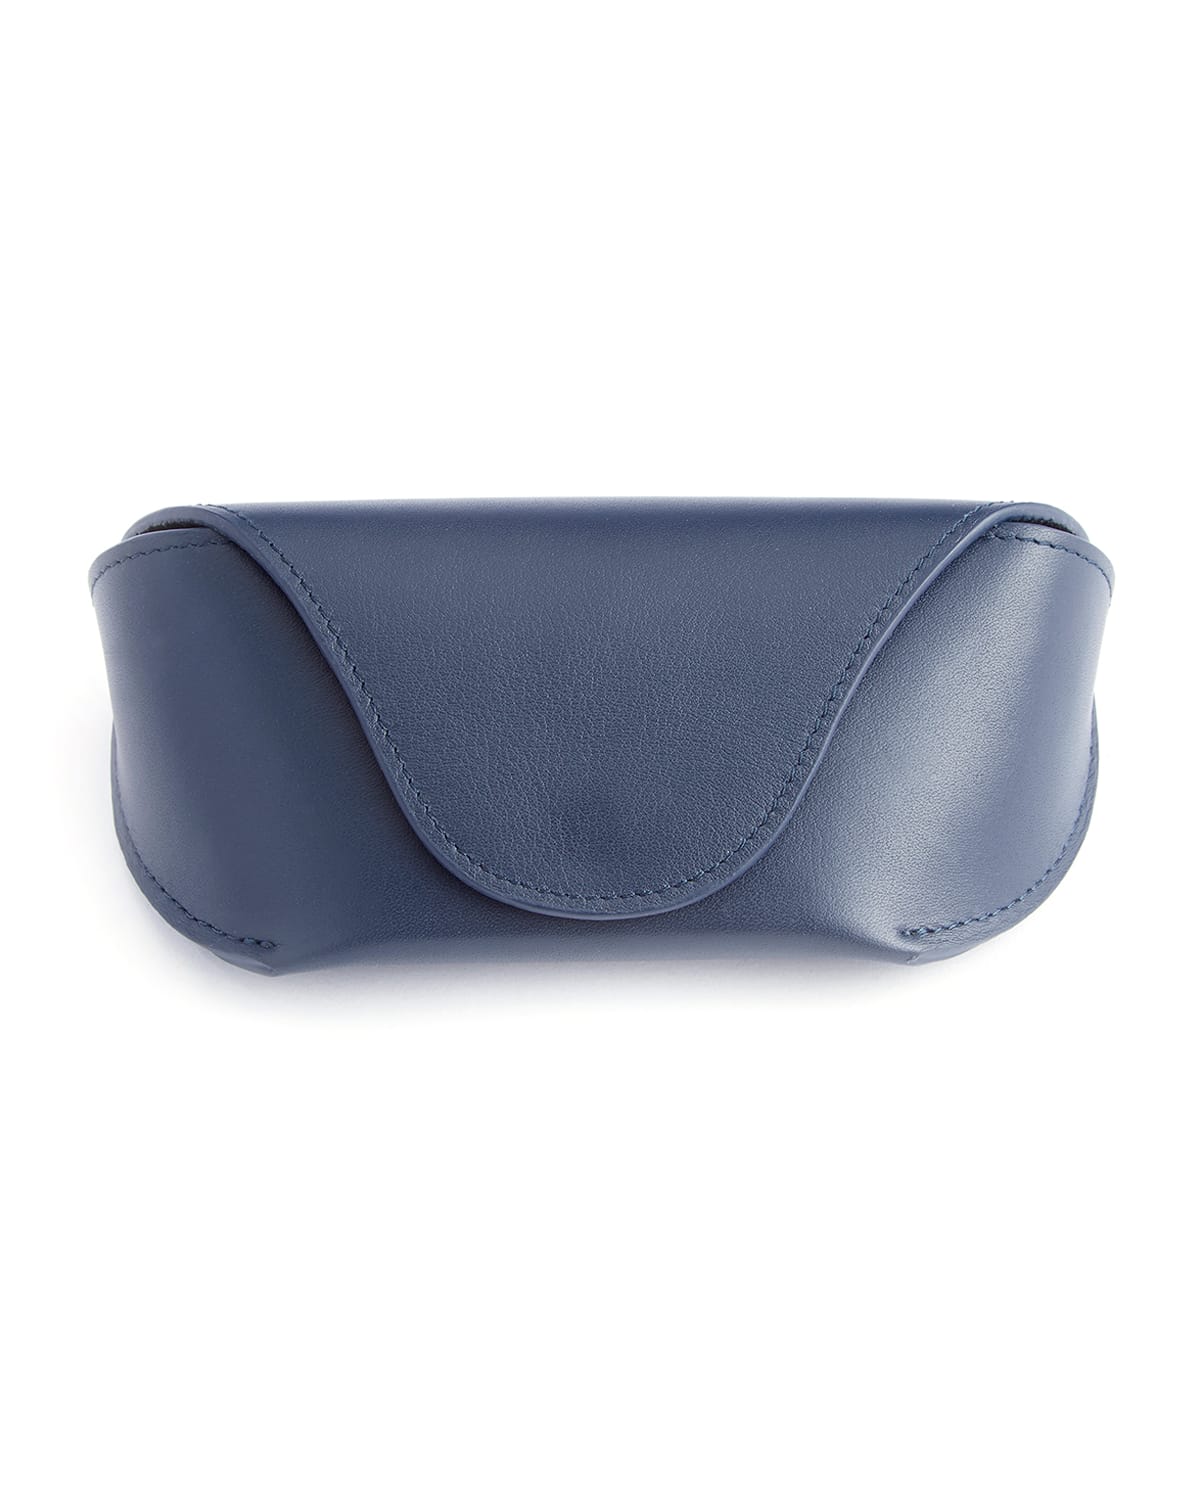 Royce New York Suede Lined Sunglasses Carrying Case In Navy Blue